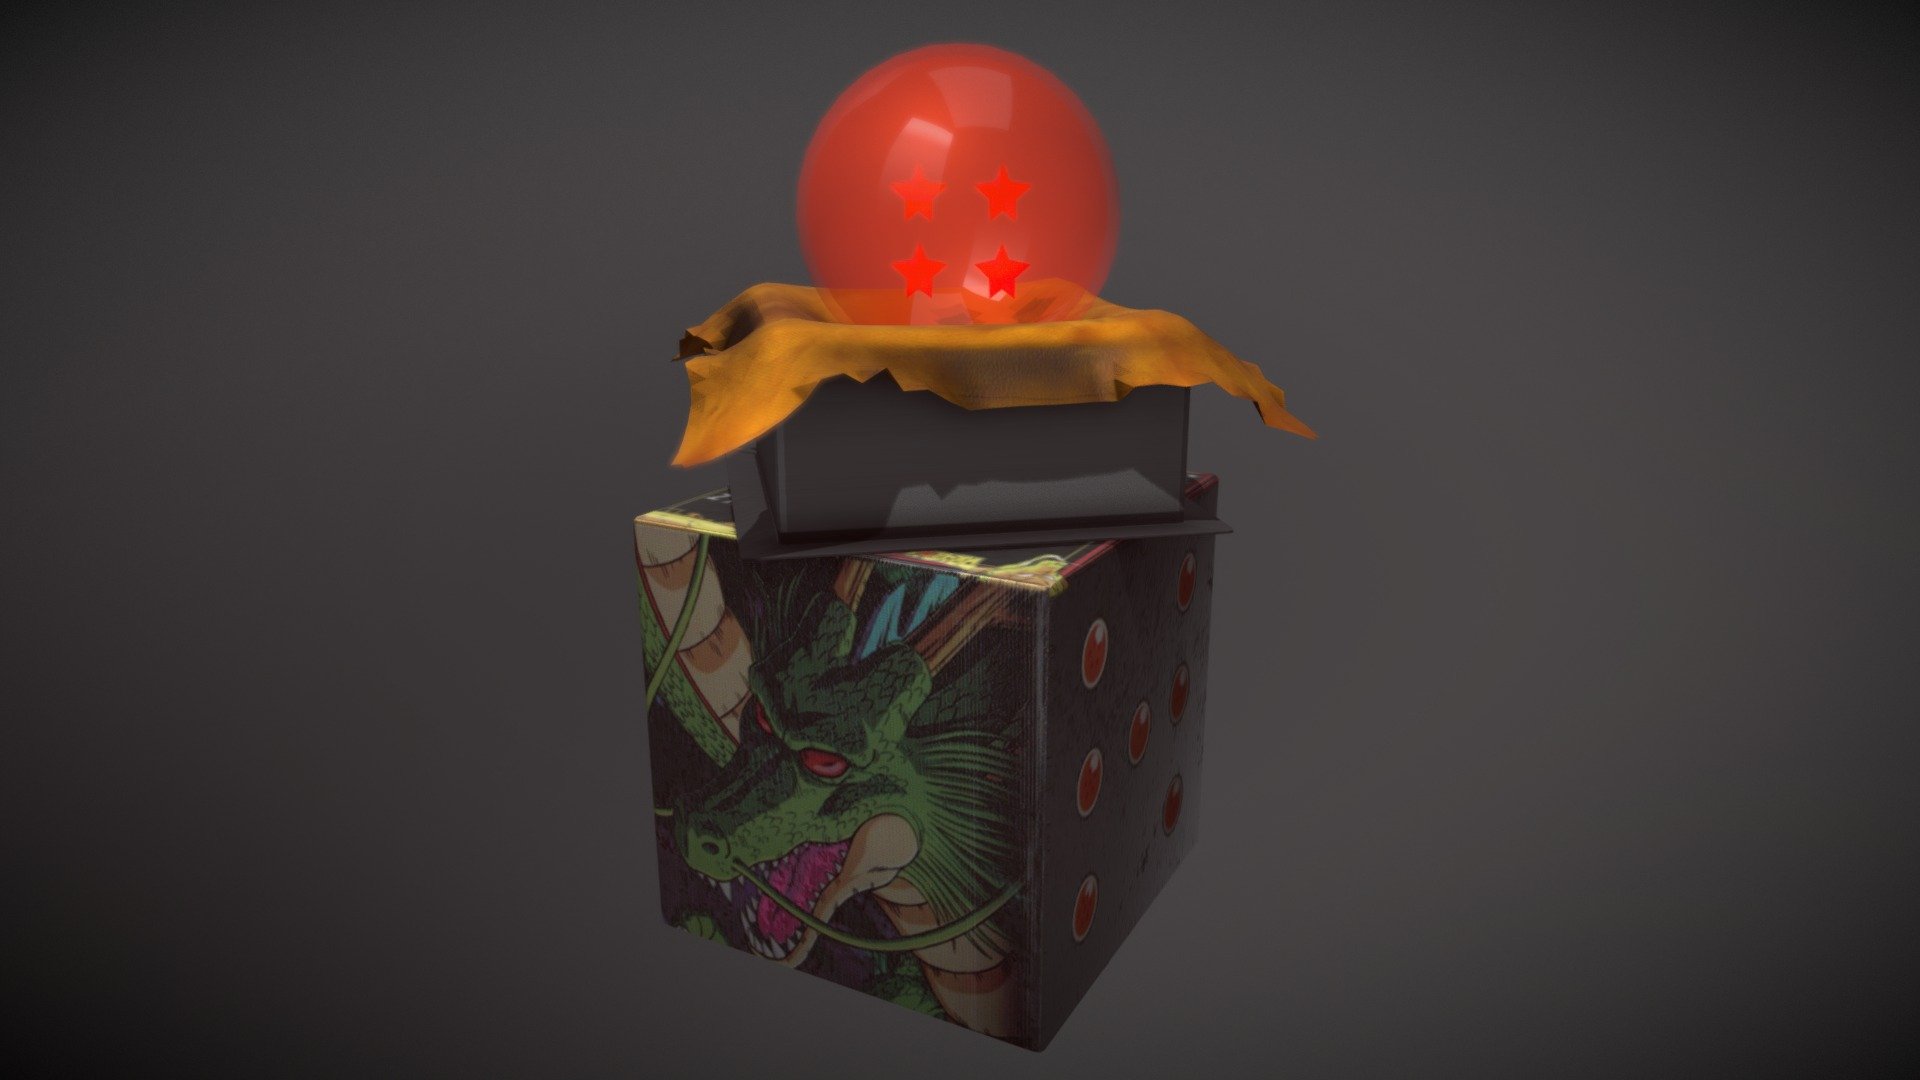 A 4 star Dragon ball that I tryed for a realisic look  based of the prop/toy 3d model